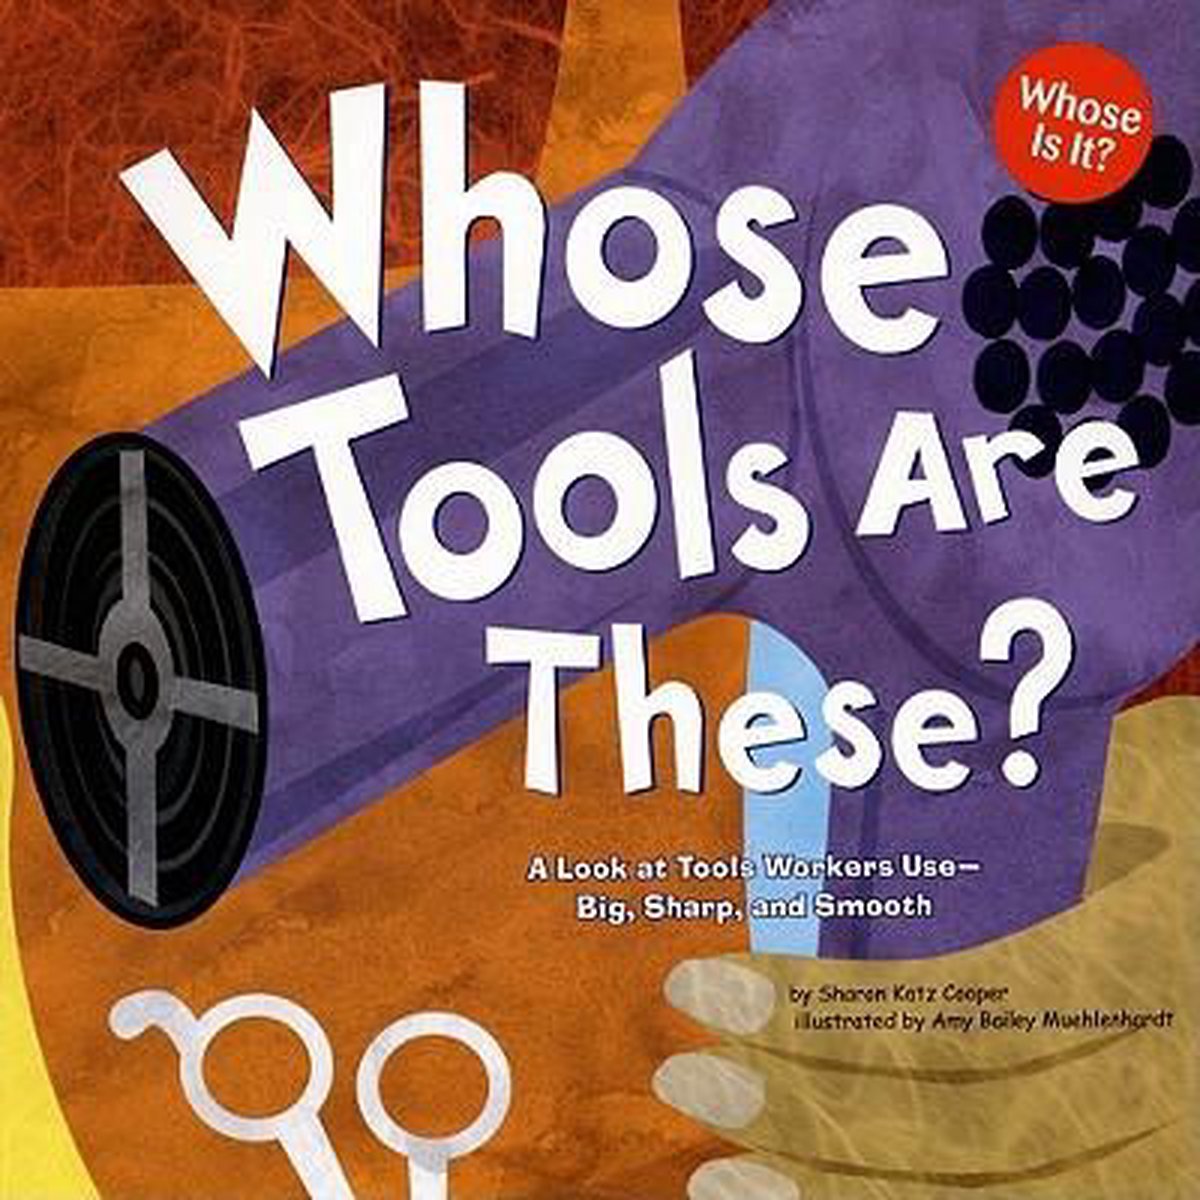 Whose Tools Are These - Sharon Katz Cooper